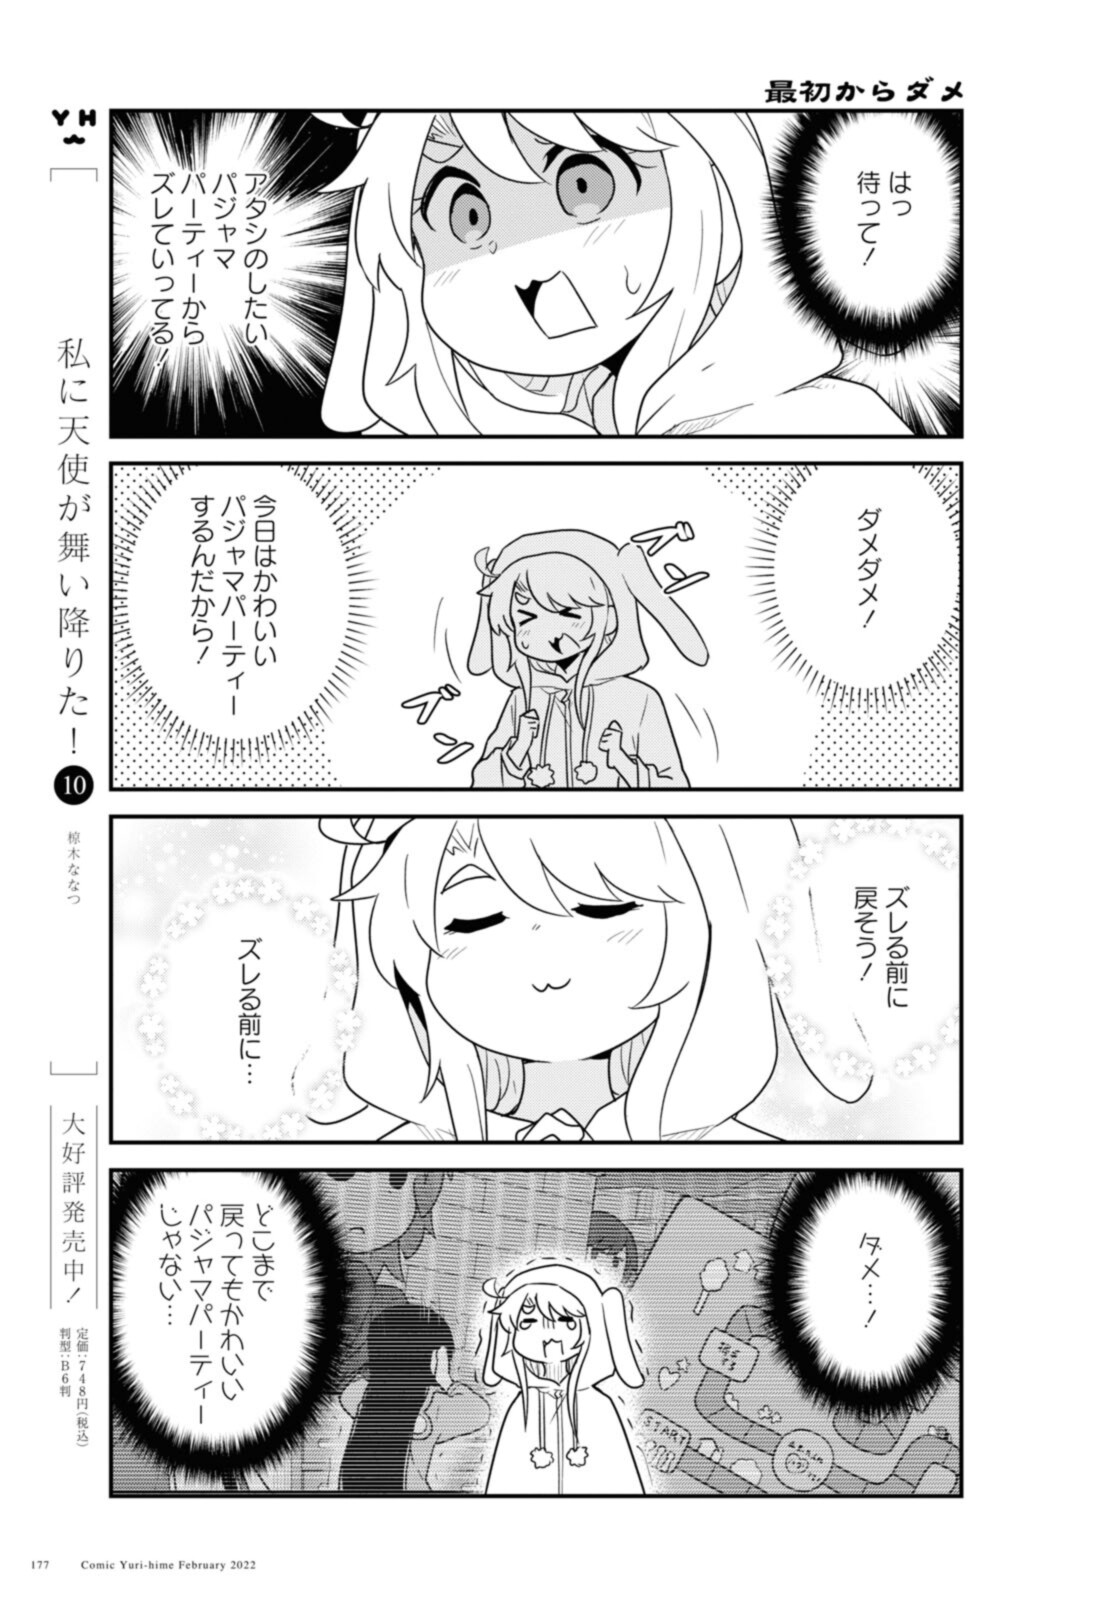 Wataten! An Angel Flew Down to Me 私に天使が舞い降りた！ 第92話 - Page 13